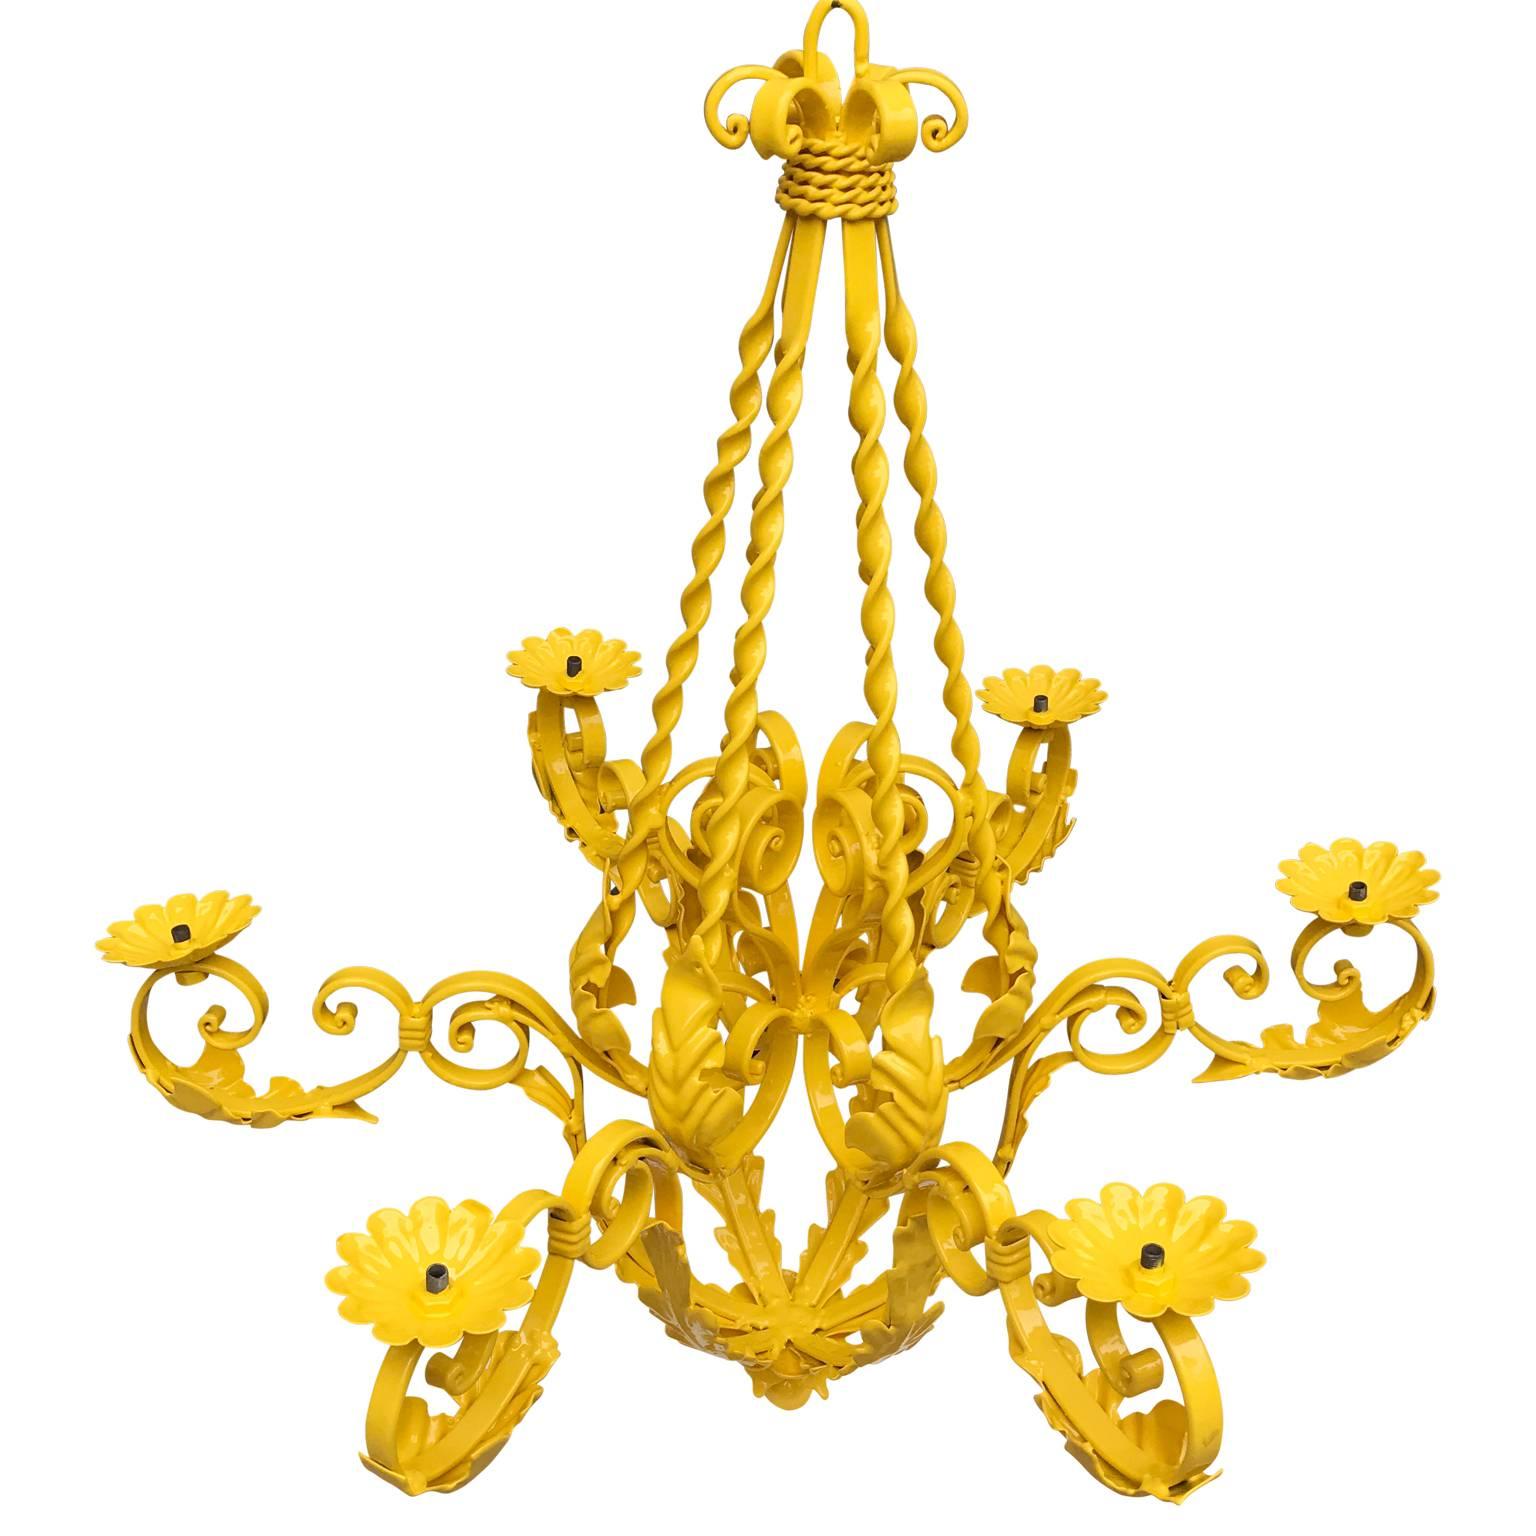 Large Mid-Century six-arm iron chandelier, powder-coated in bright sunshine-yellow paint.
Recently rewired, UL standardized.
